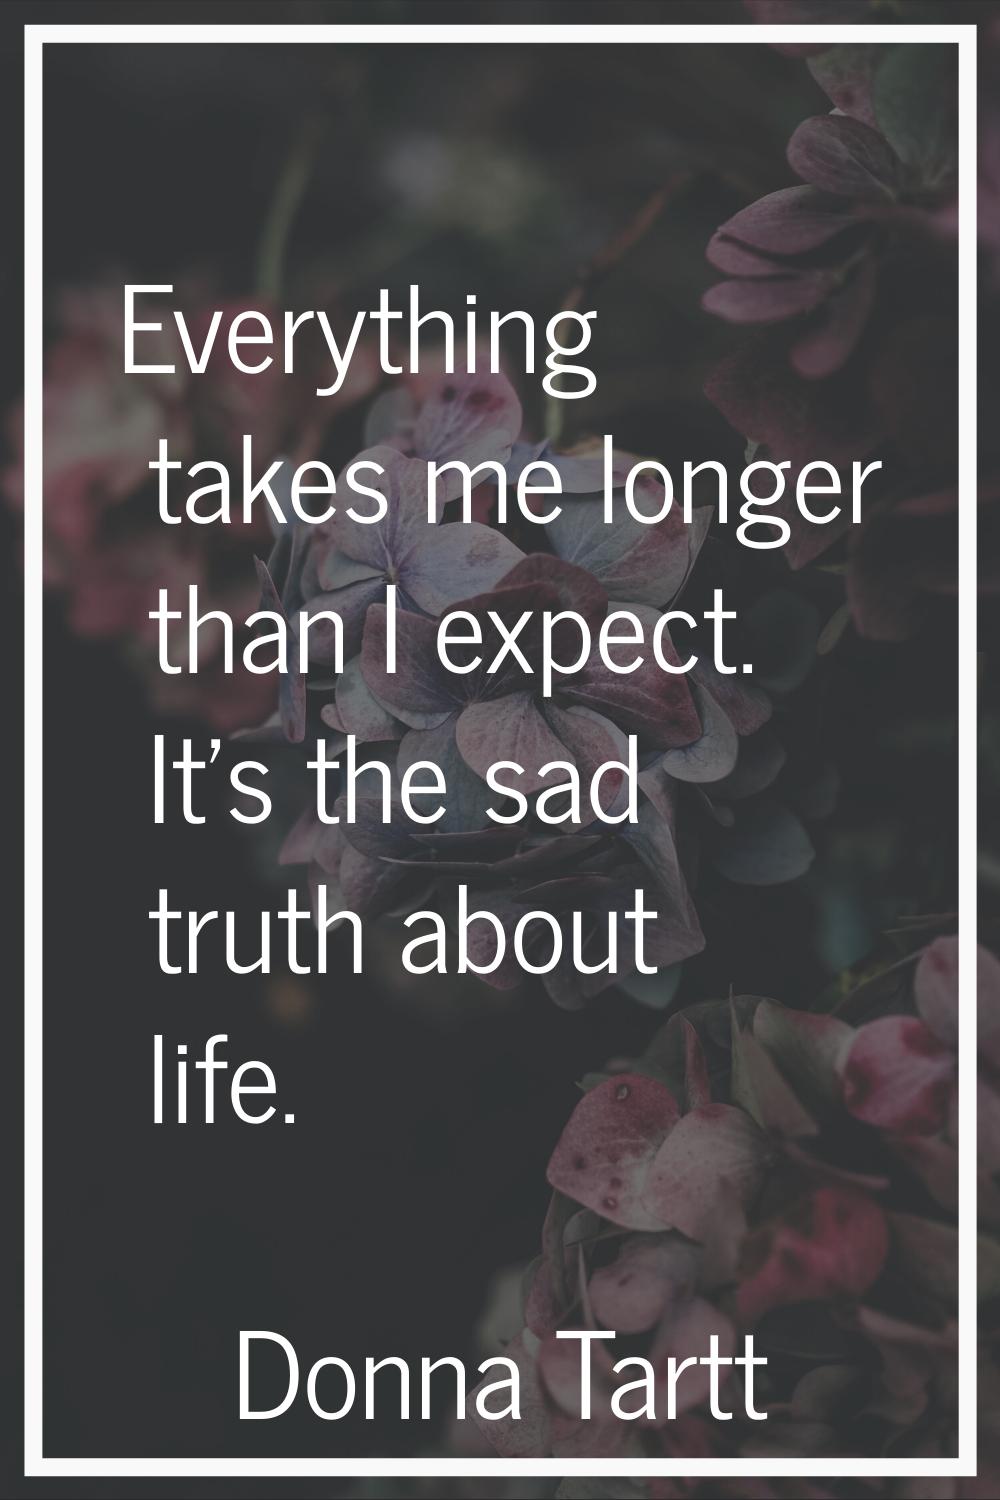 Everything takes me longer than I expect. It's the sad truth about life.